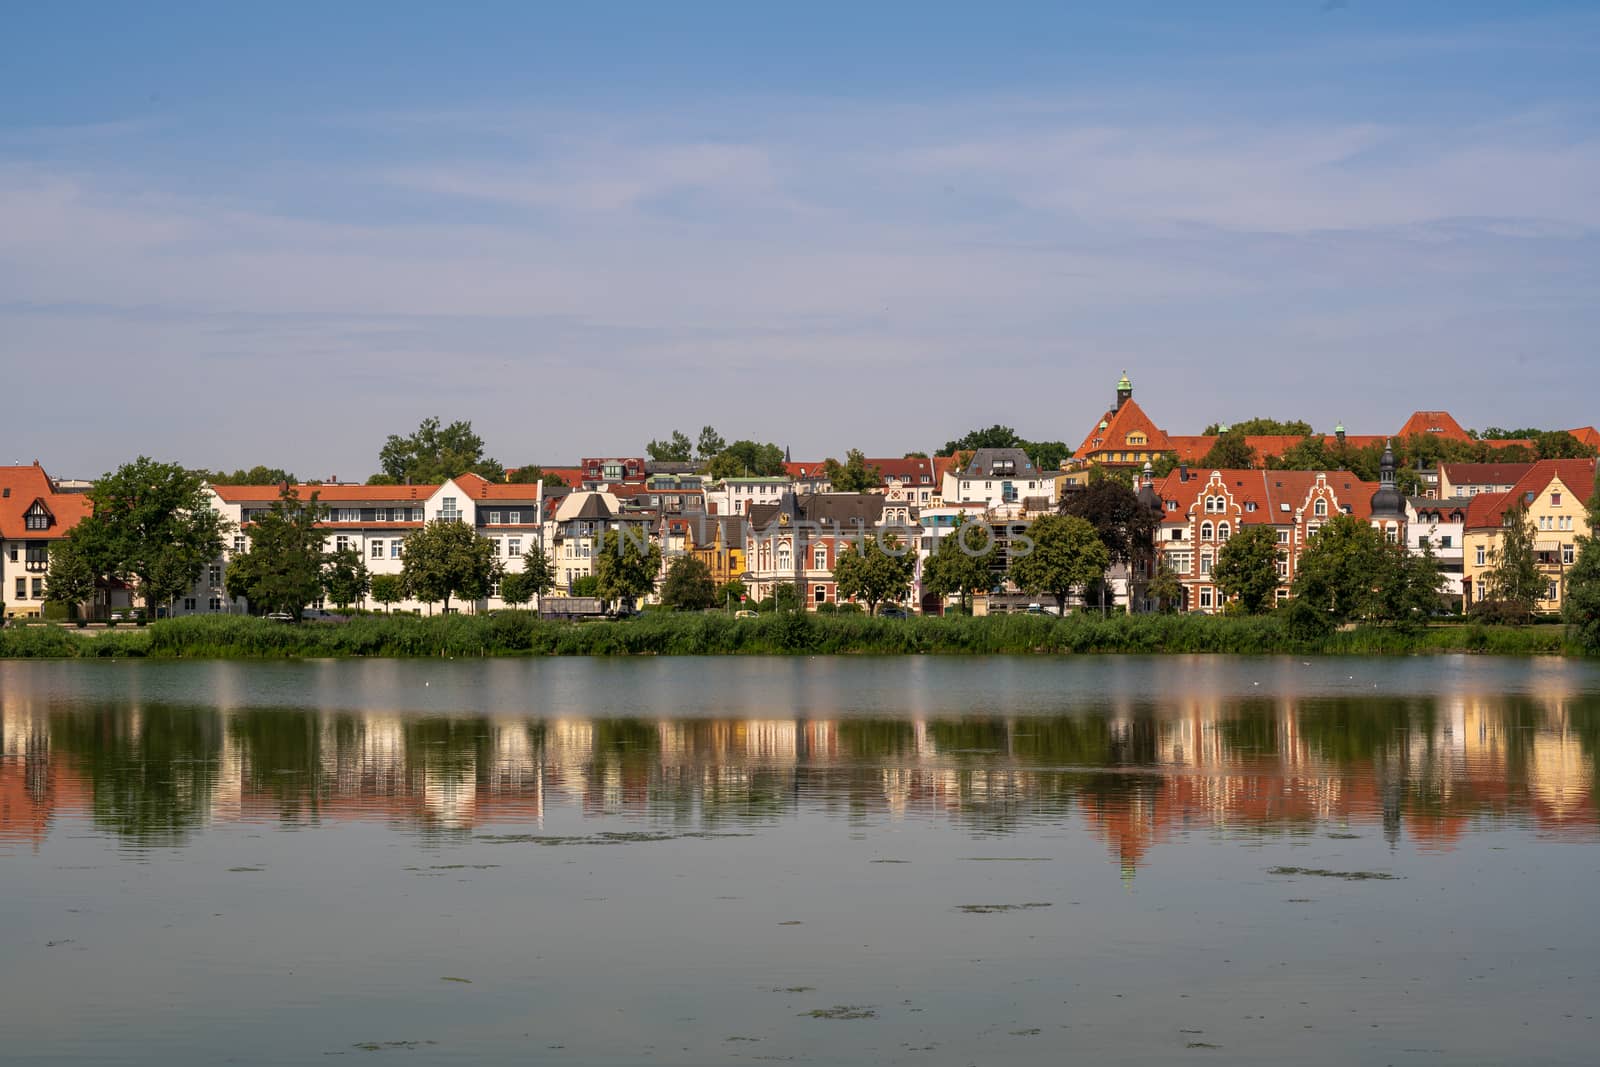 Lakefront houses in Schwerin Germany are reflected in the waters of the lake on a summer morning.